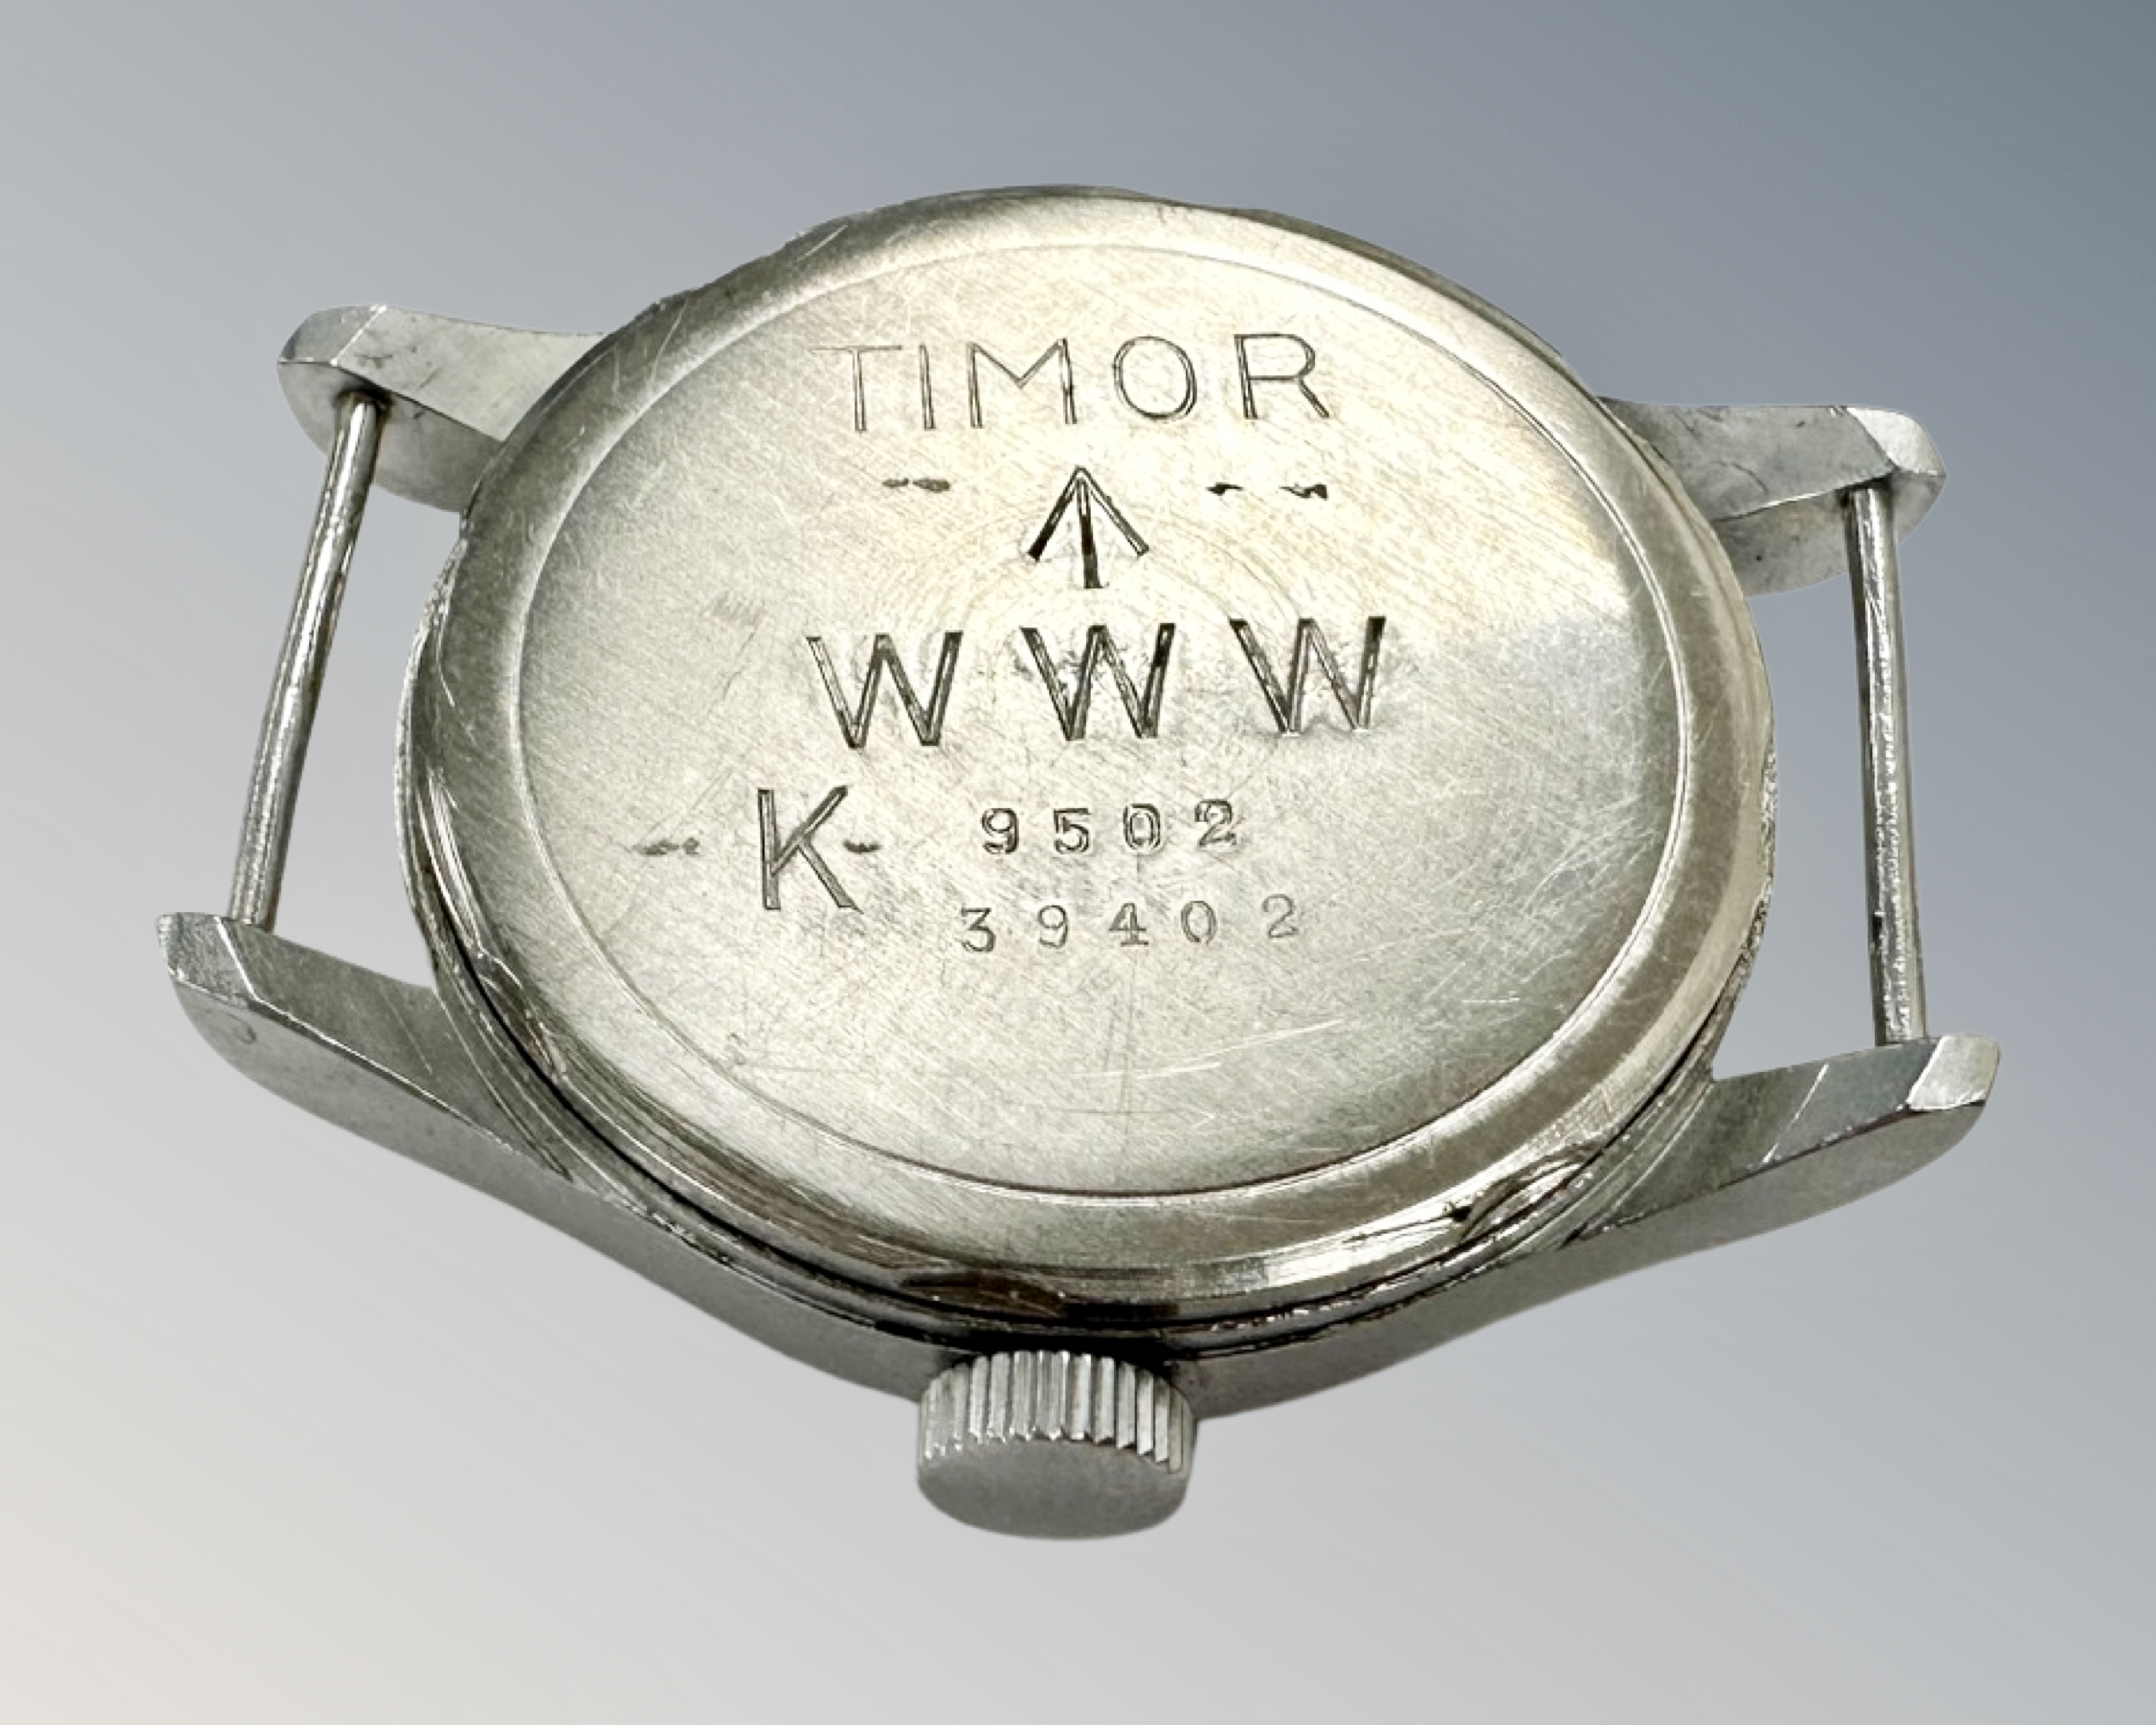 A Timor WWII British military issue so-called 'Dirty Dozen' wristwatch, - Image 4 of 5